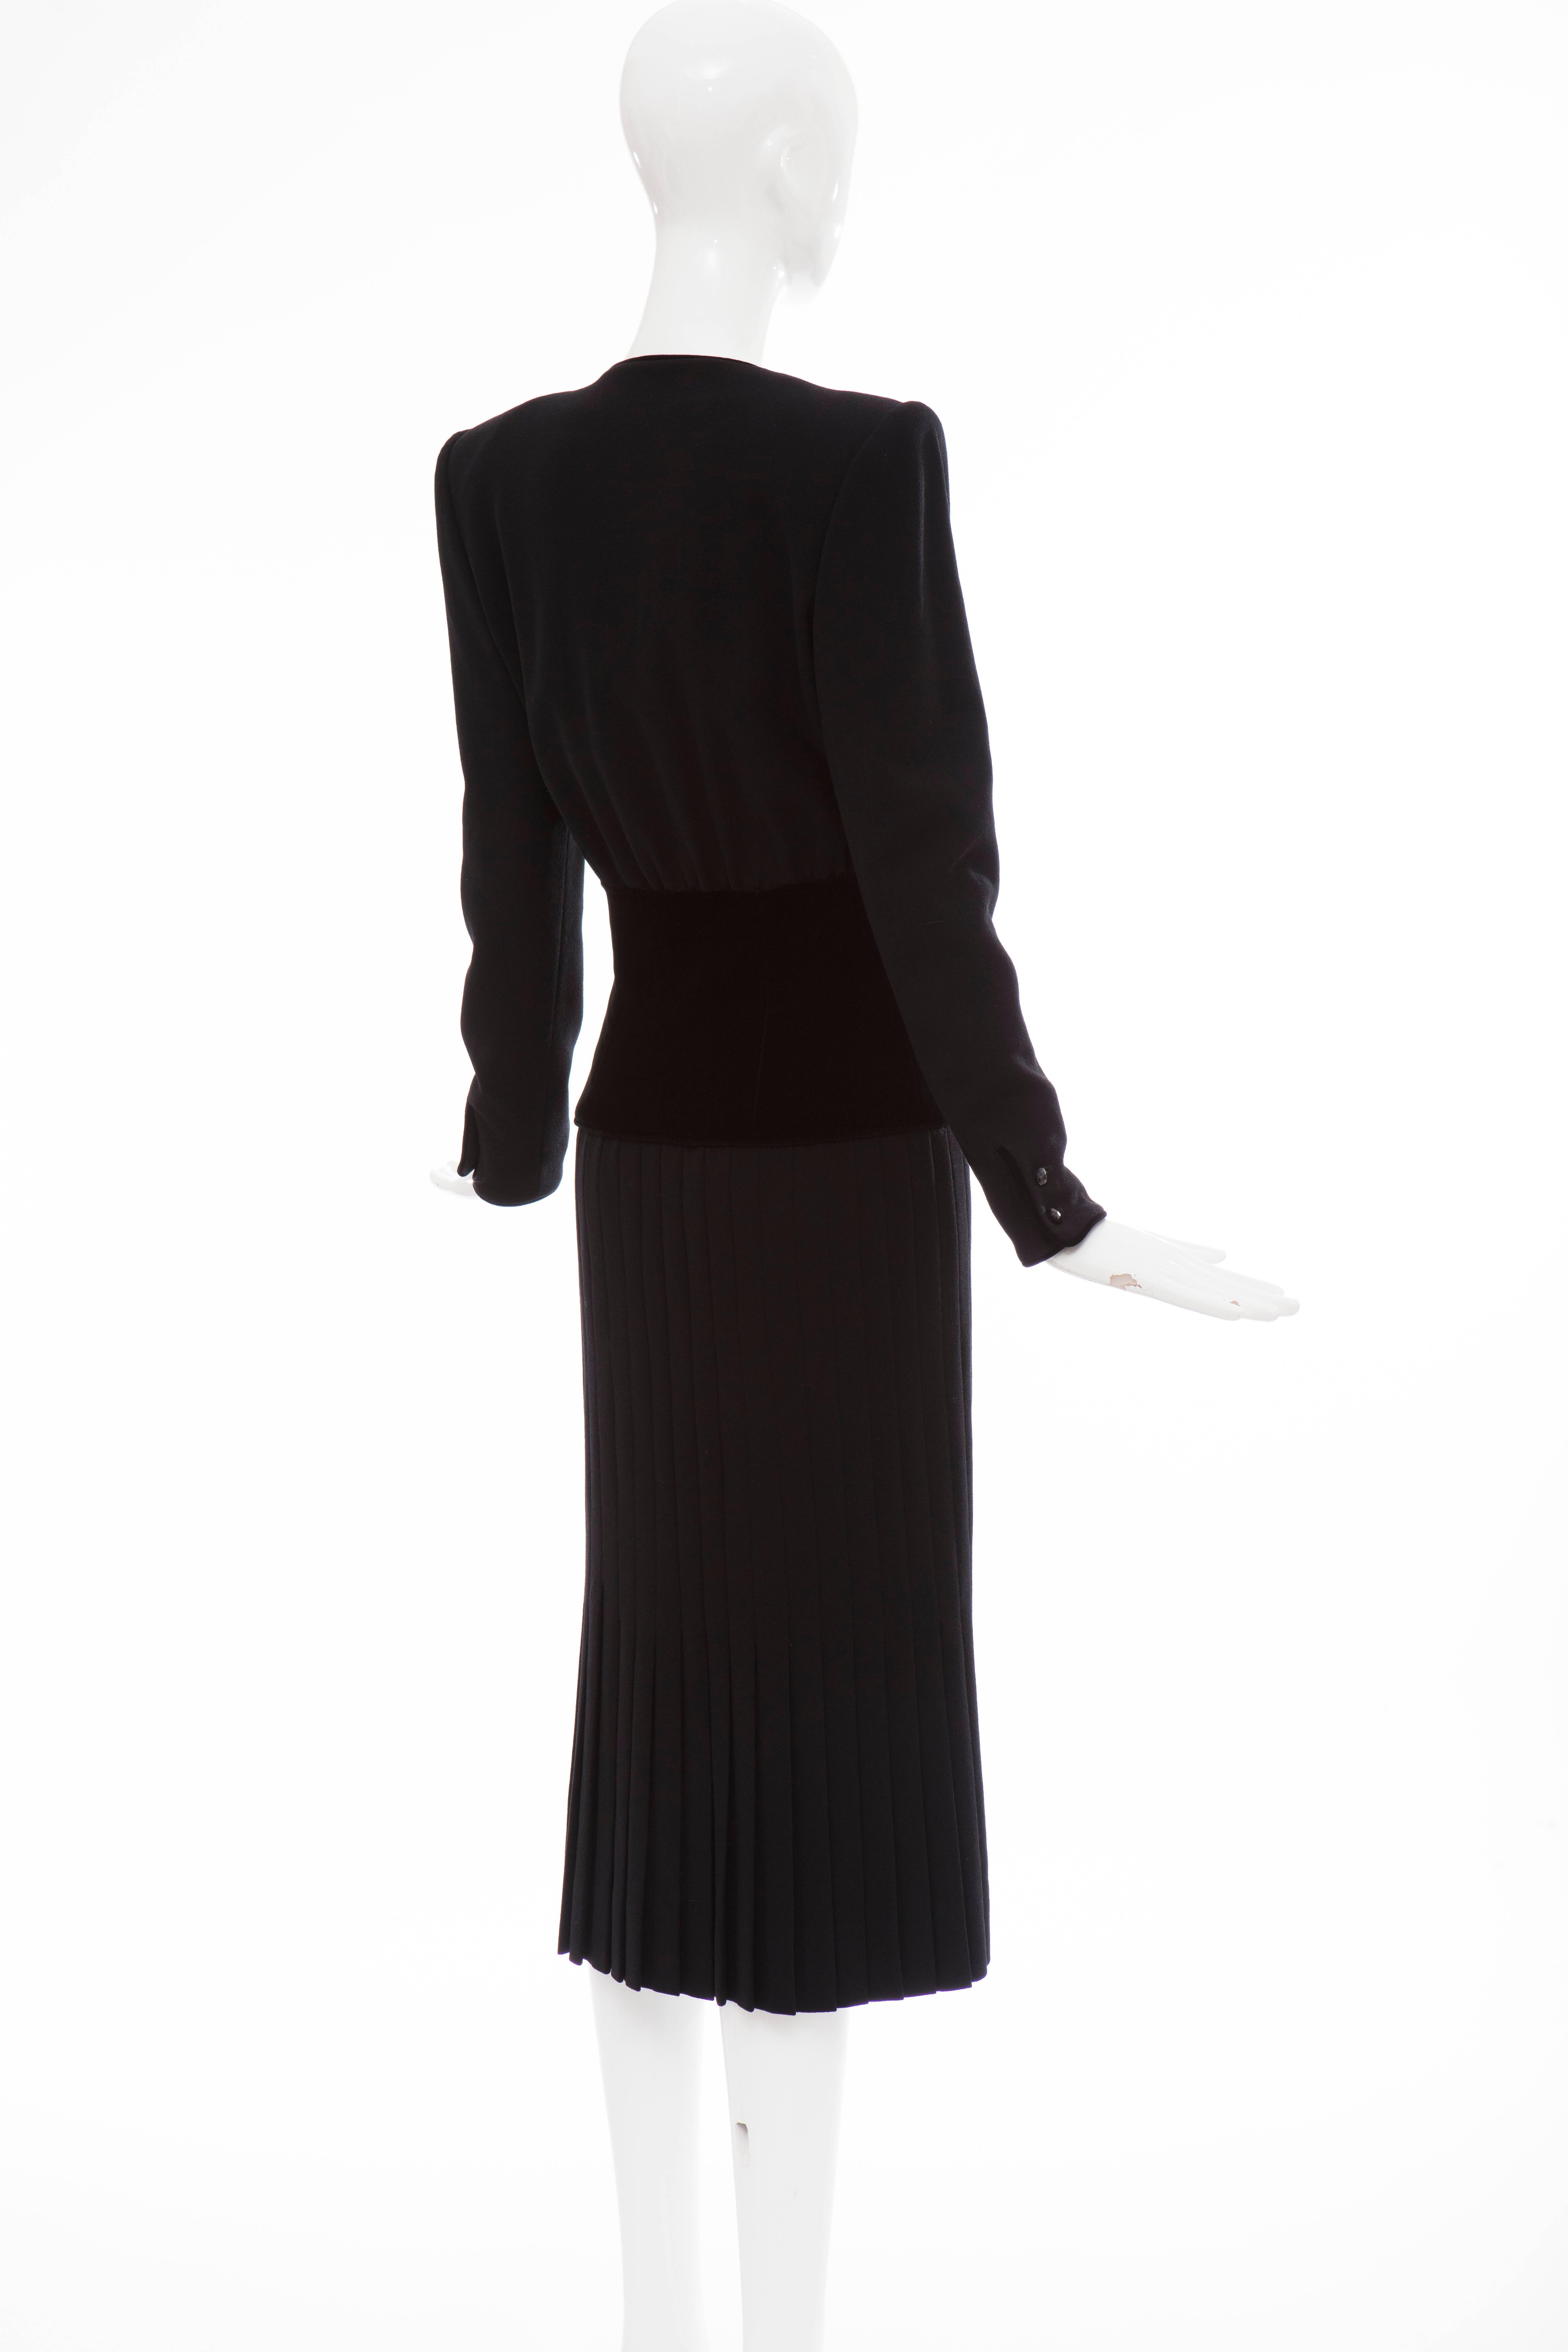 Valentino Black Wool Crepe And Velvet Evening Dress, Circa 1980's For Sale 1